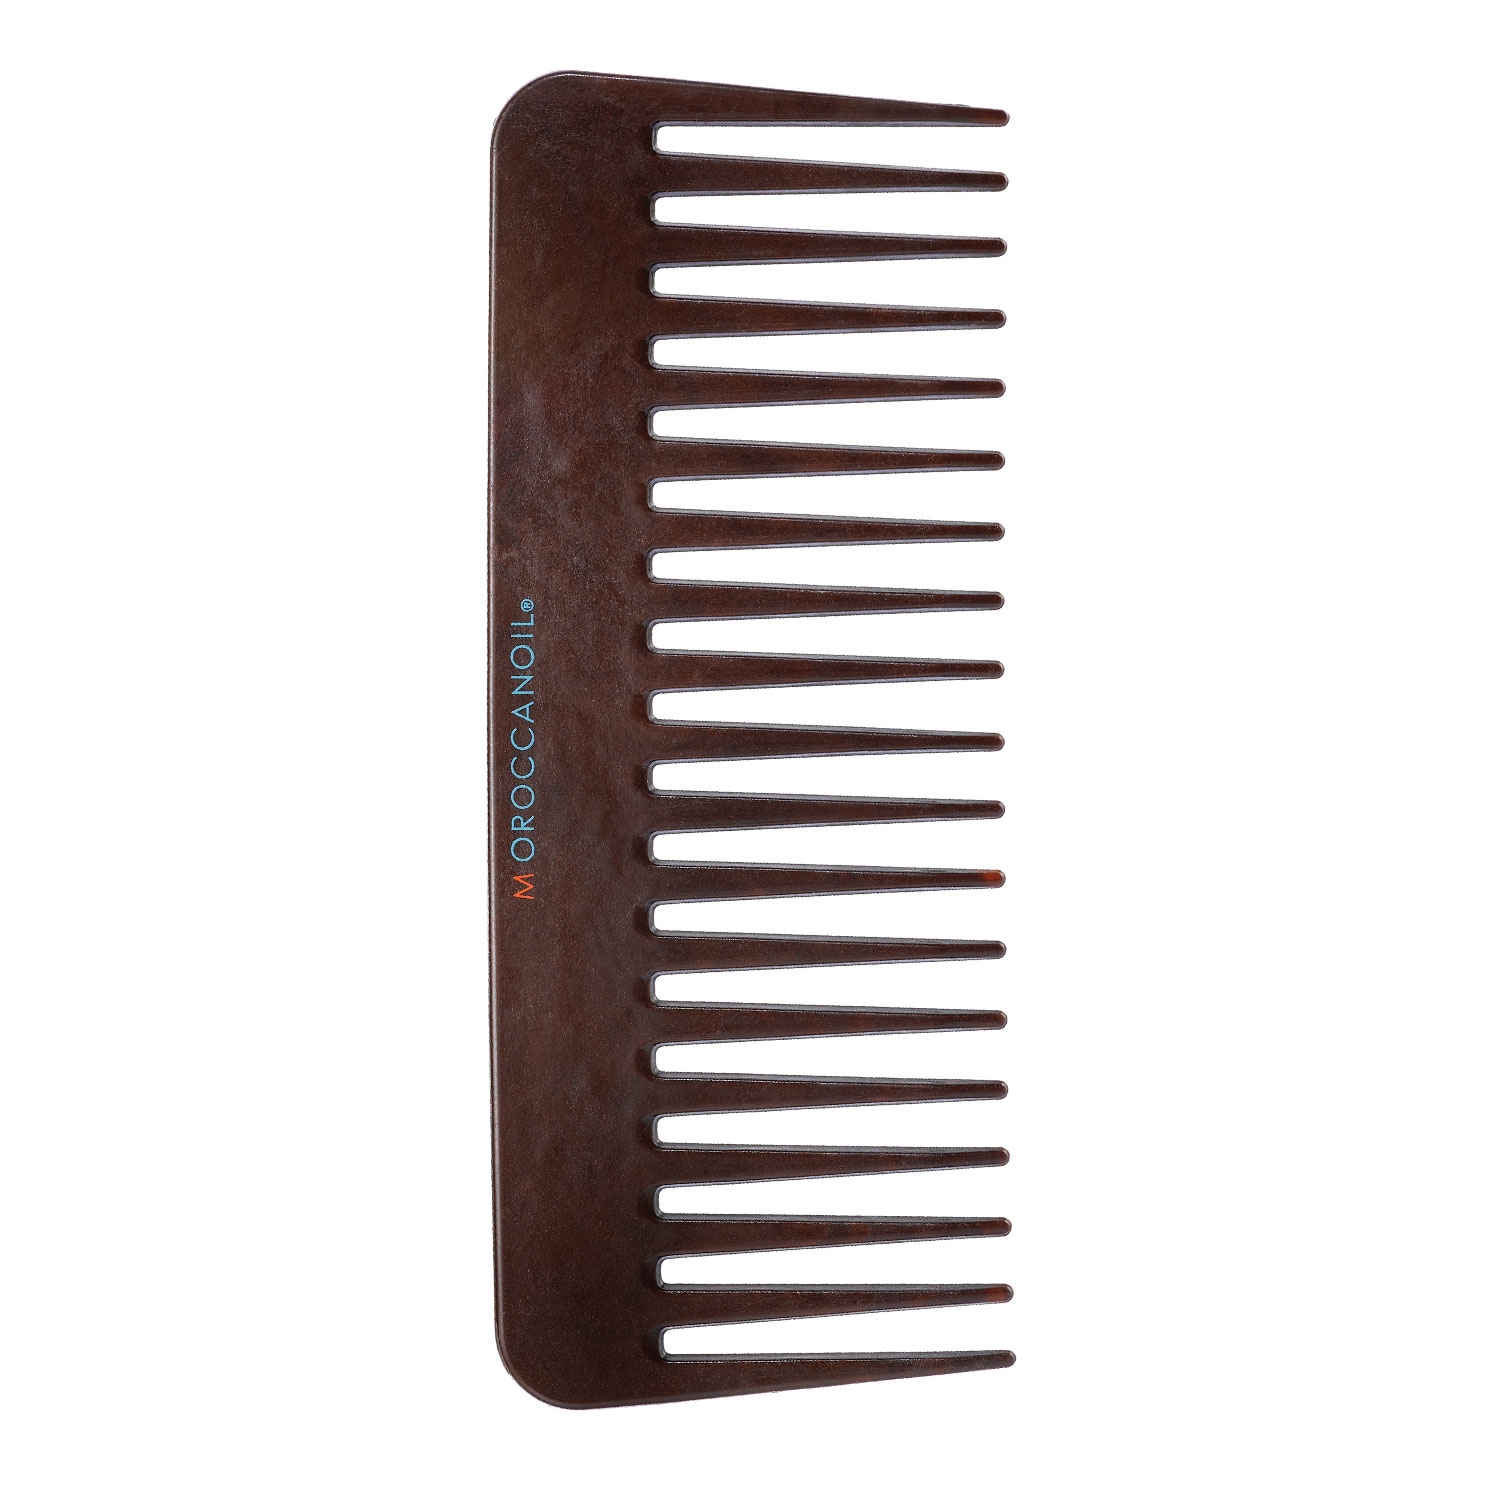 Product image from Moroccanoil - Detangling Comb